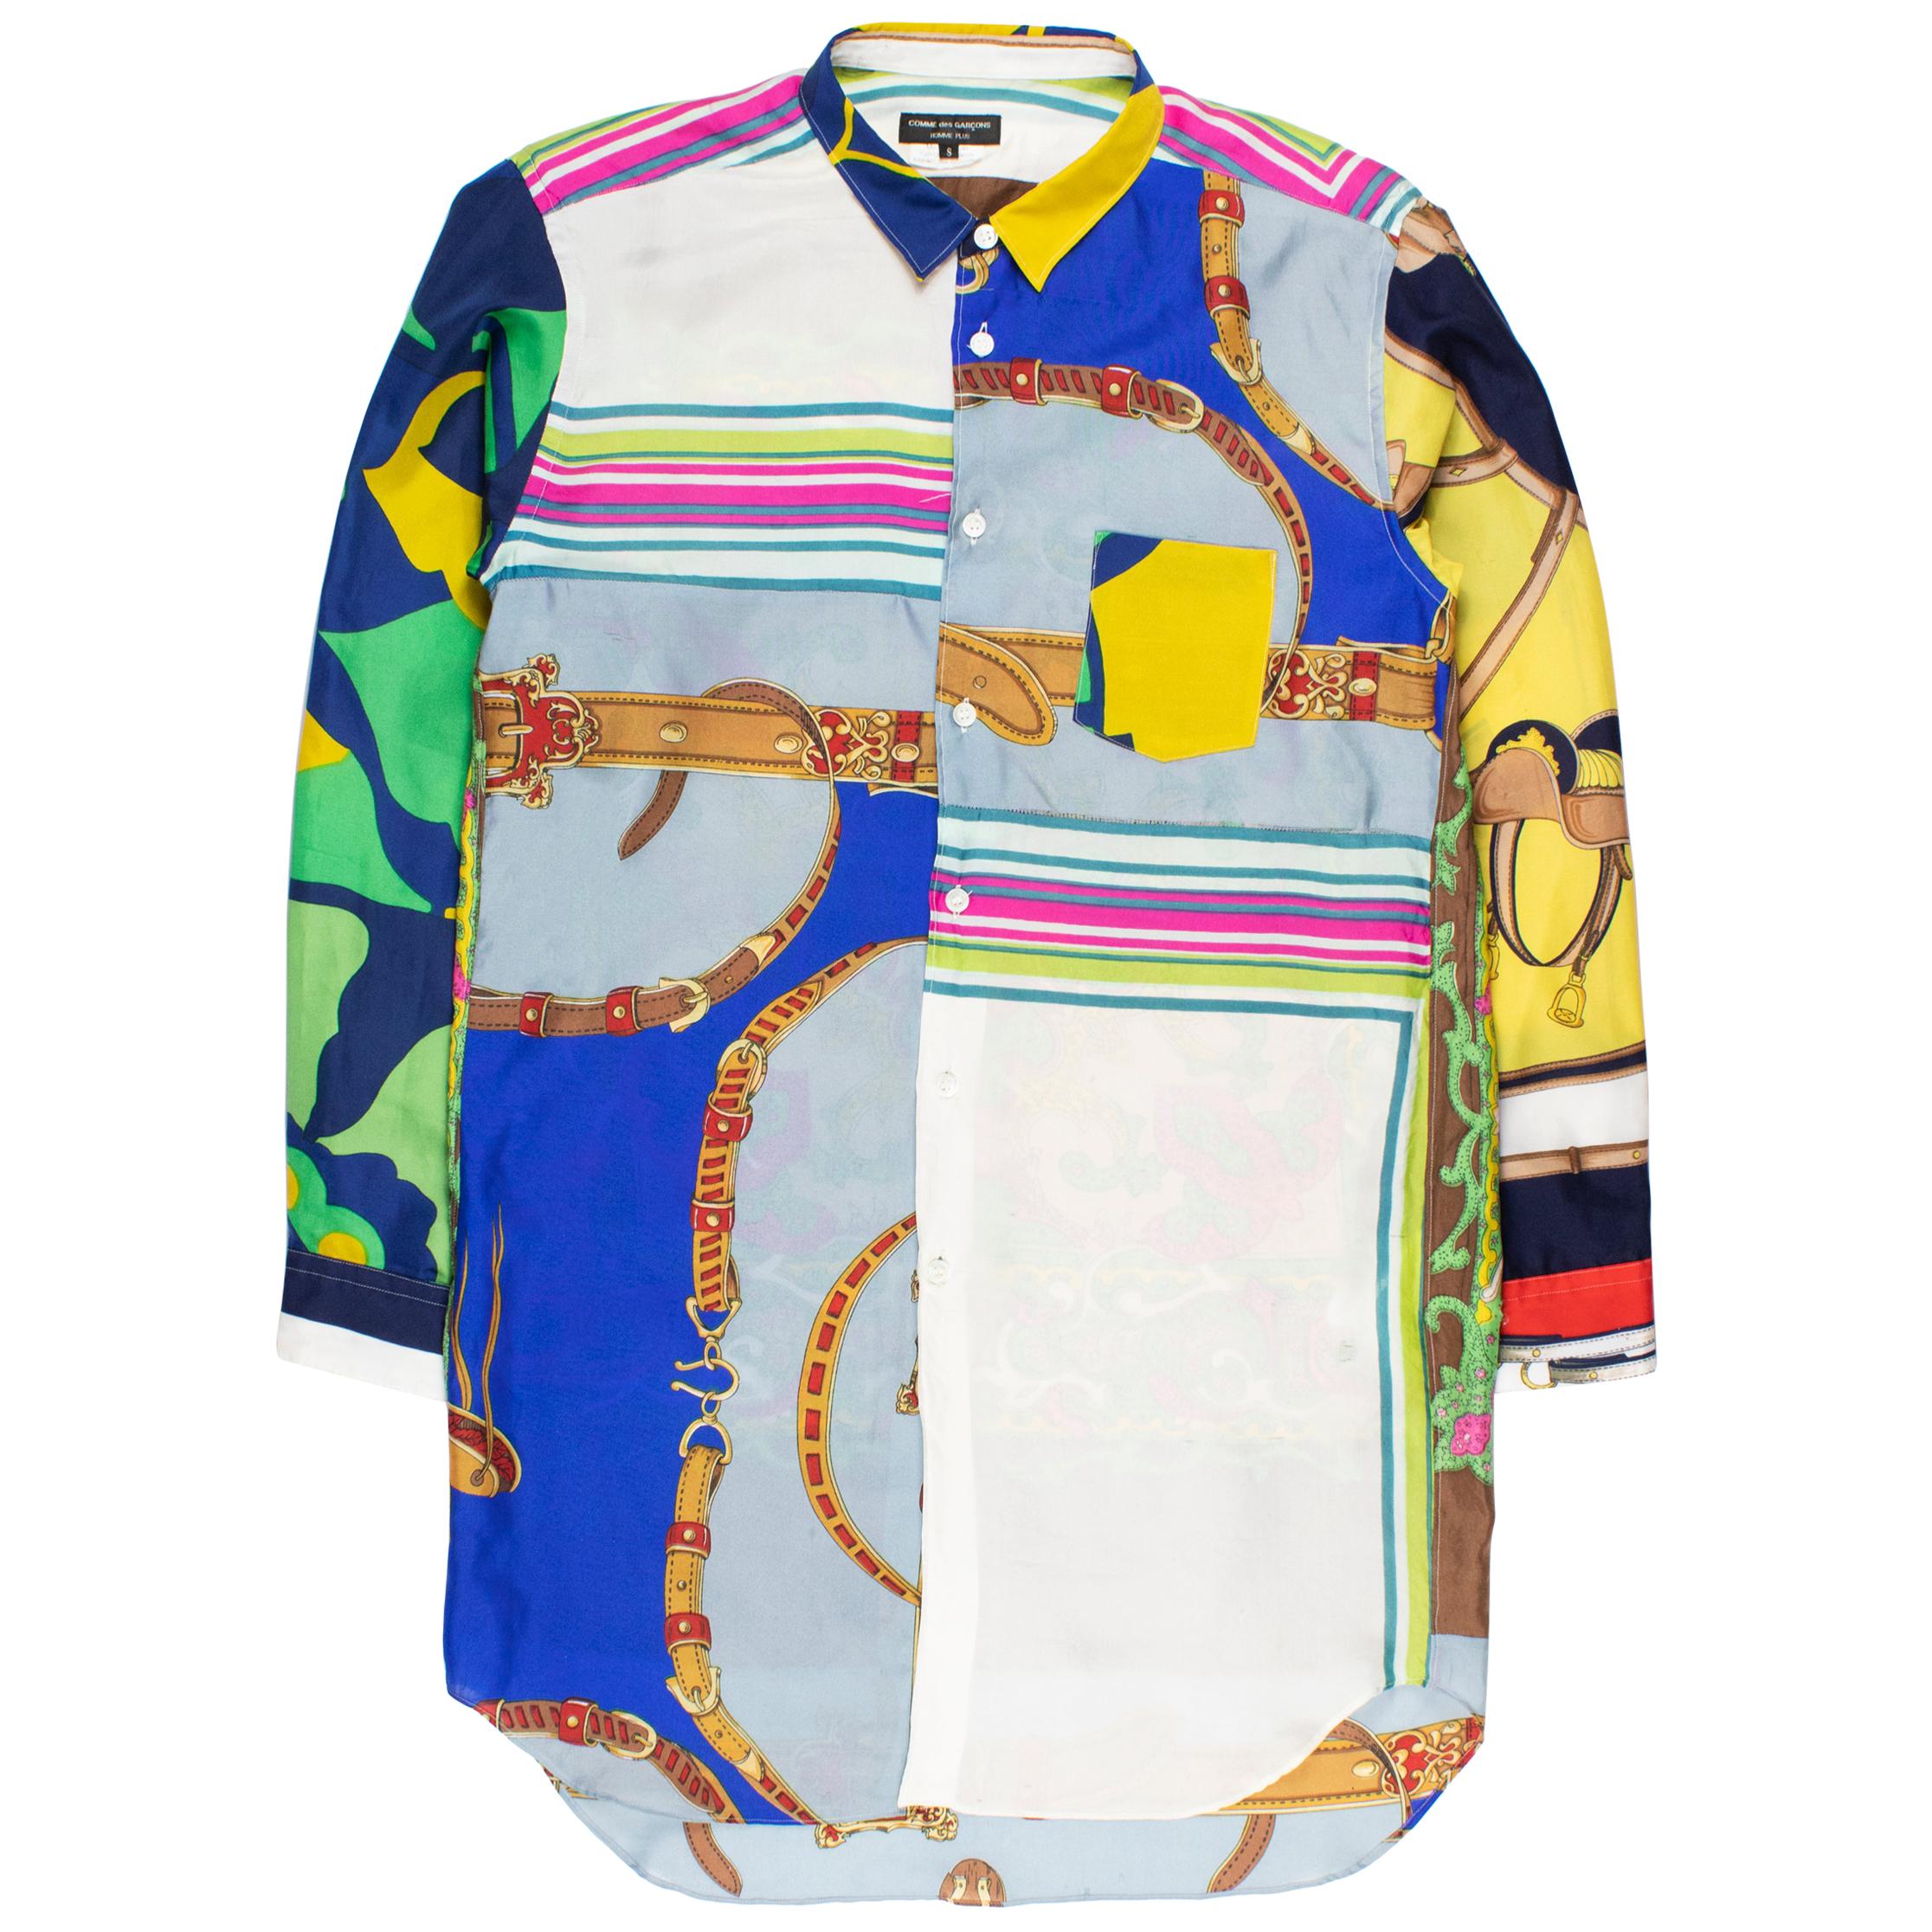 Comme des Garçons Homme Plus AW2011 "Decadence" Reconstructed Scarf Shirt